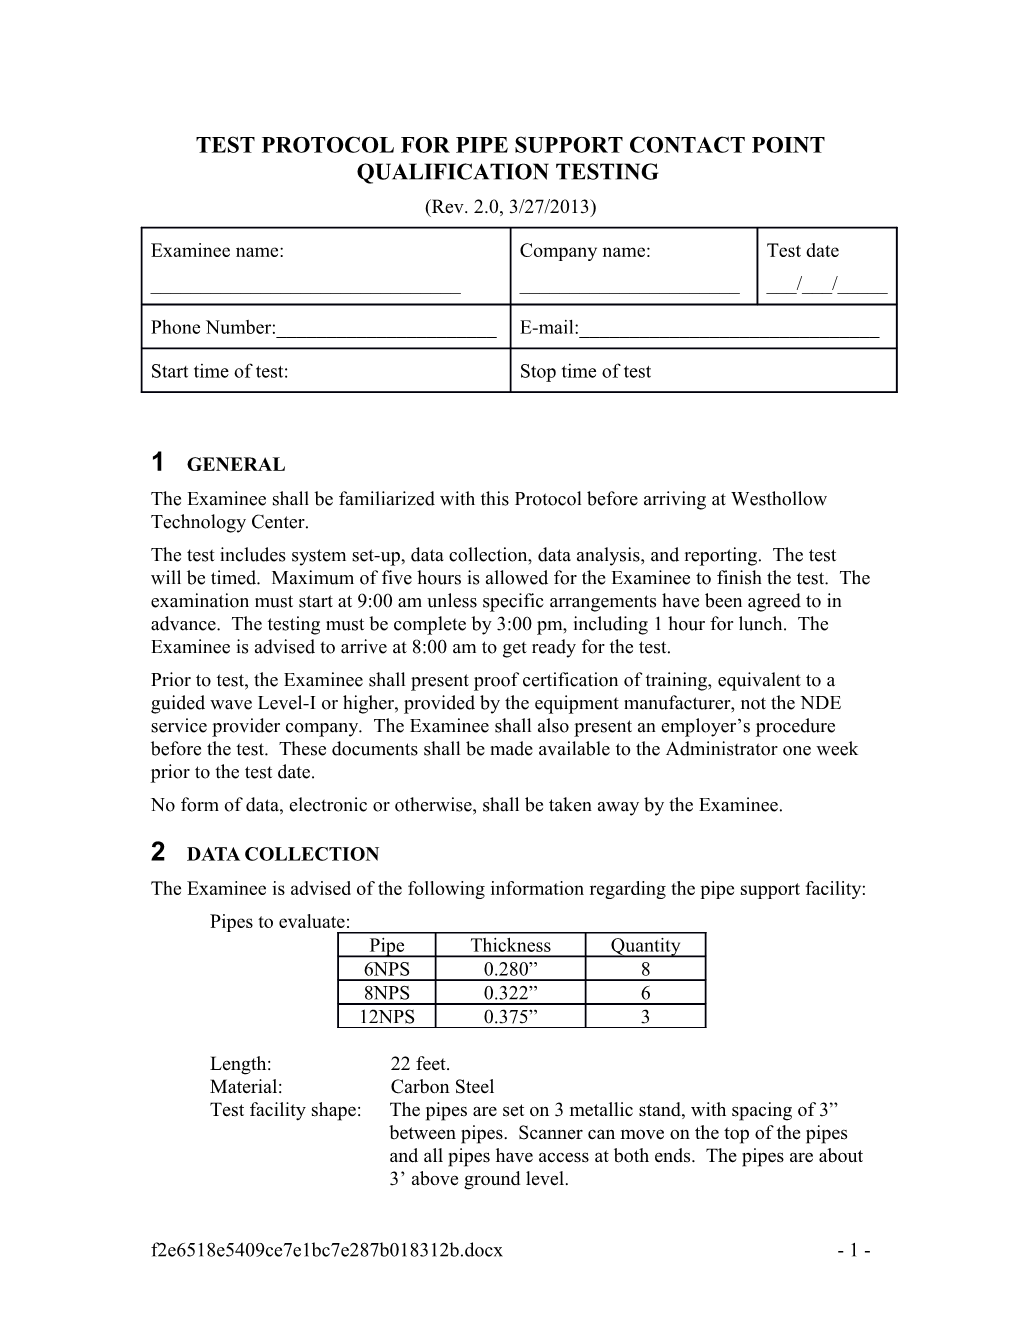 Test Protocol for Guided Wave Ultasonic Testing on the Westhollow Test Loop